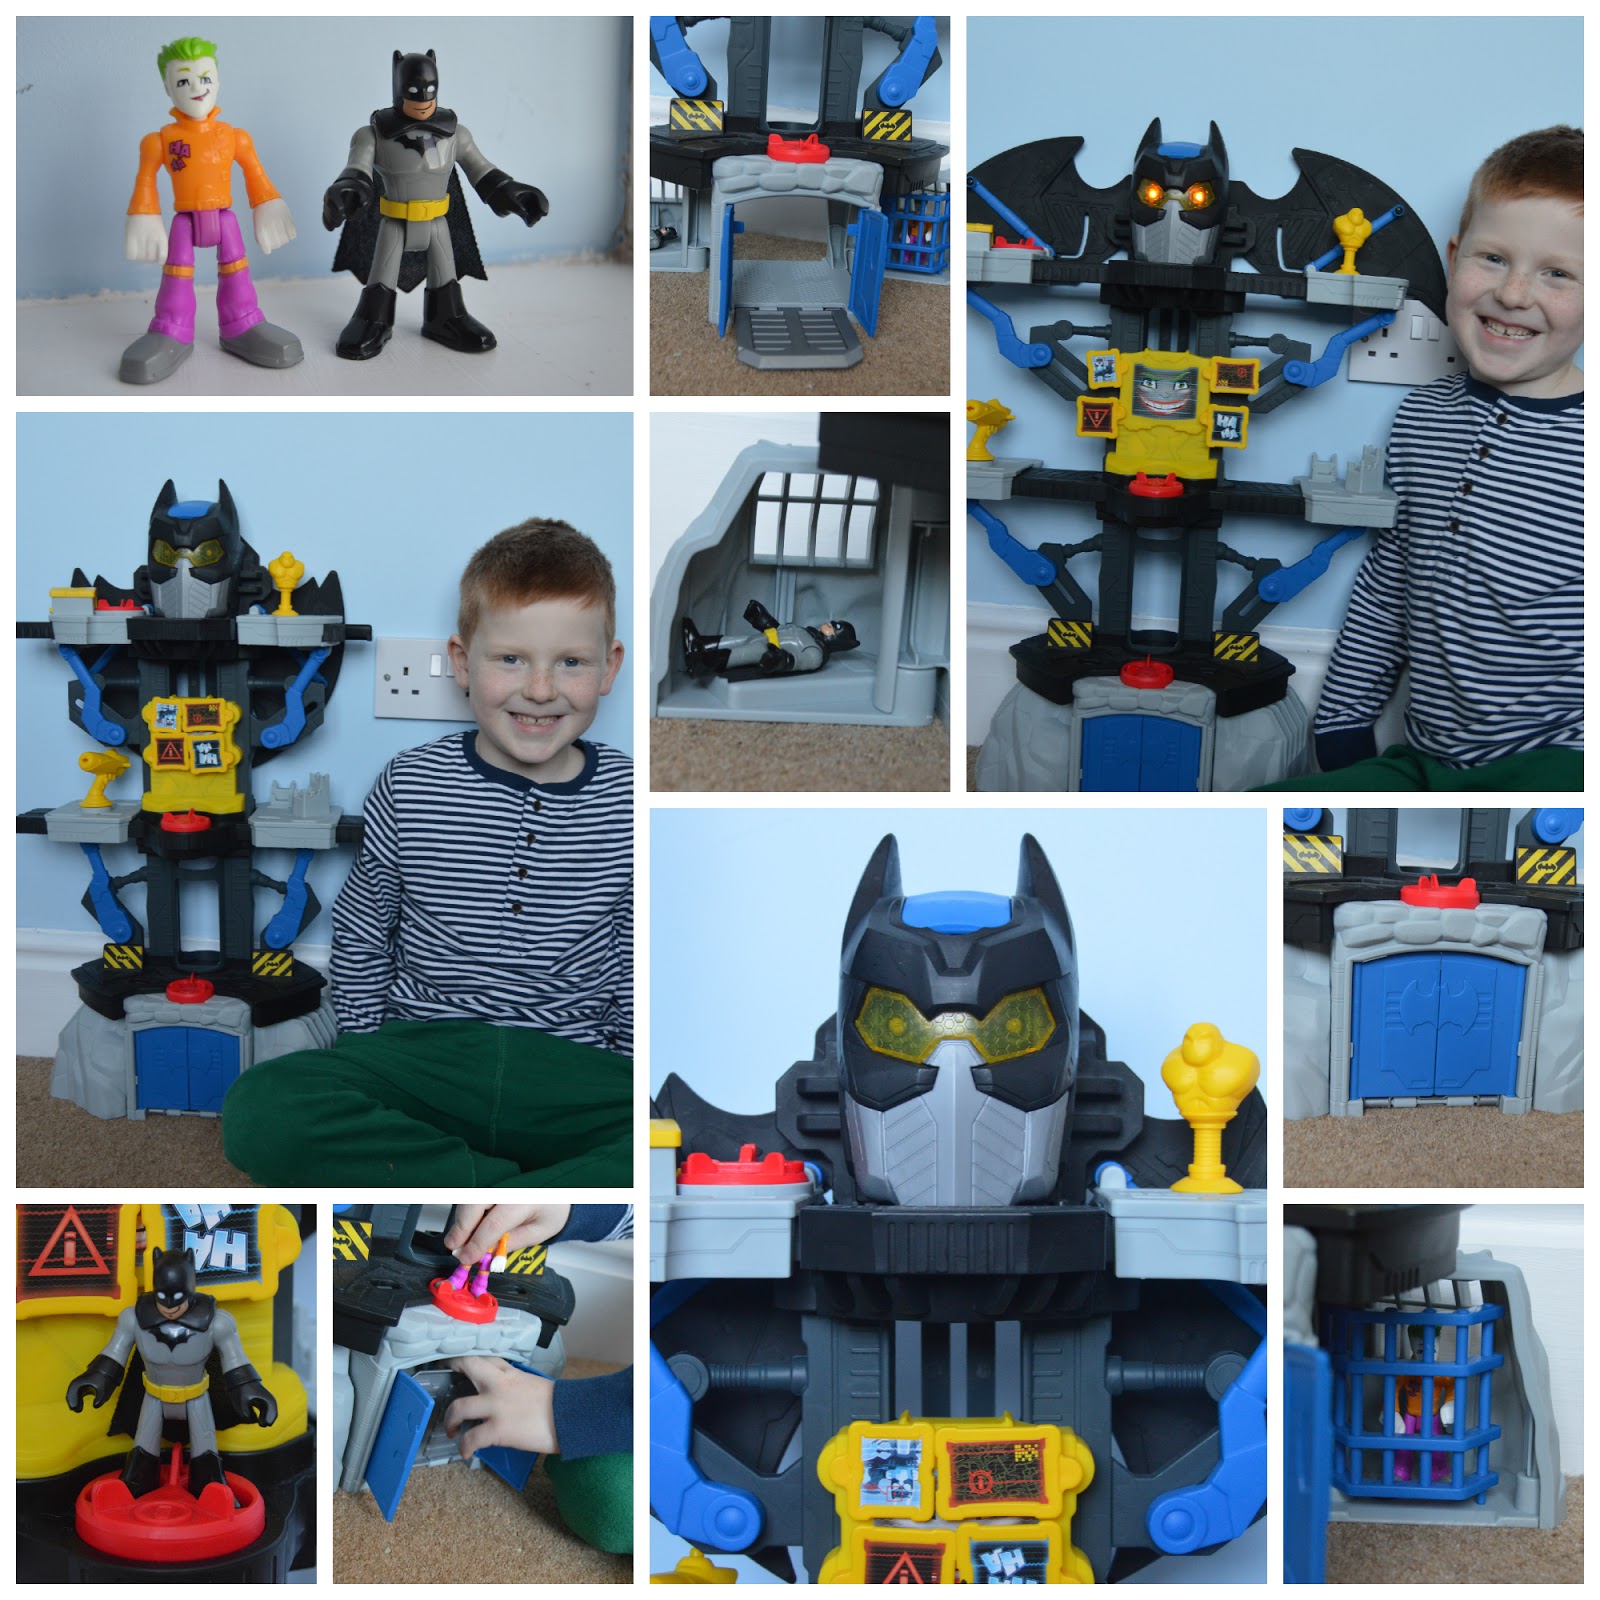 Imaginext DC Super Friends Transforming Batcave - Review - We're going on  an adventure